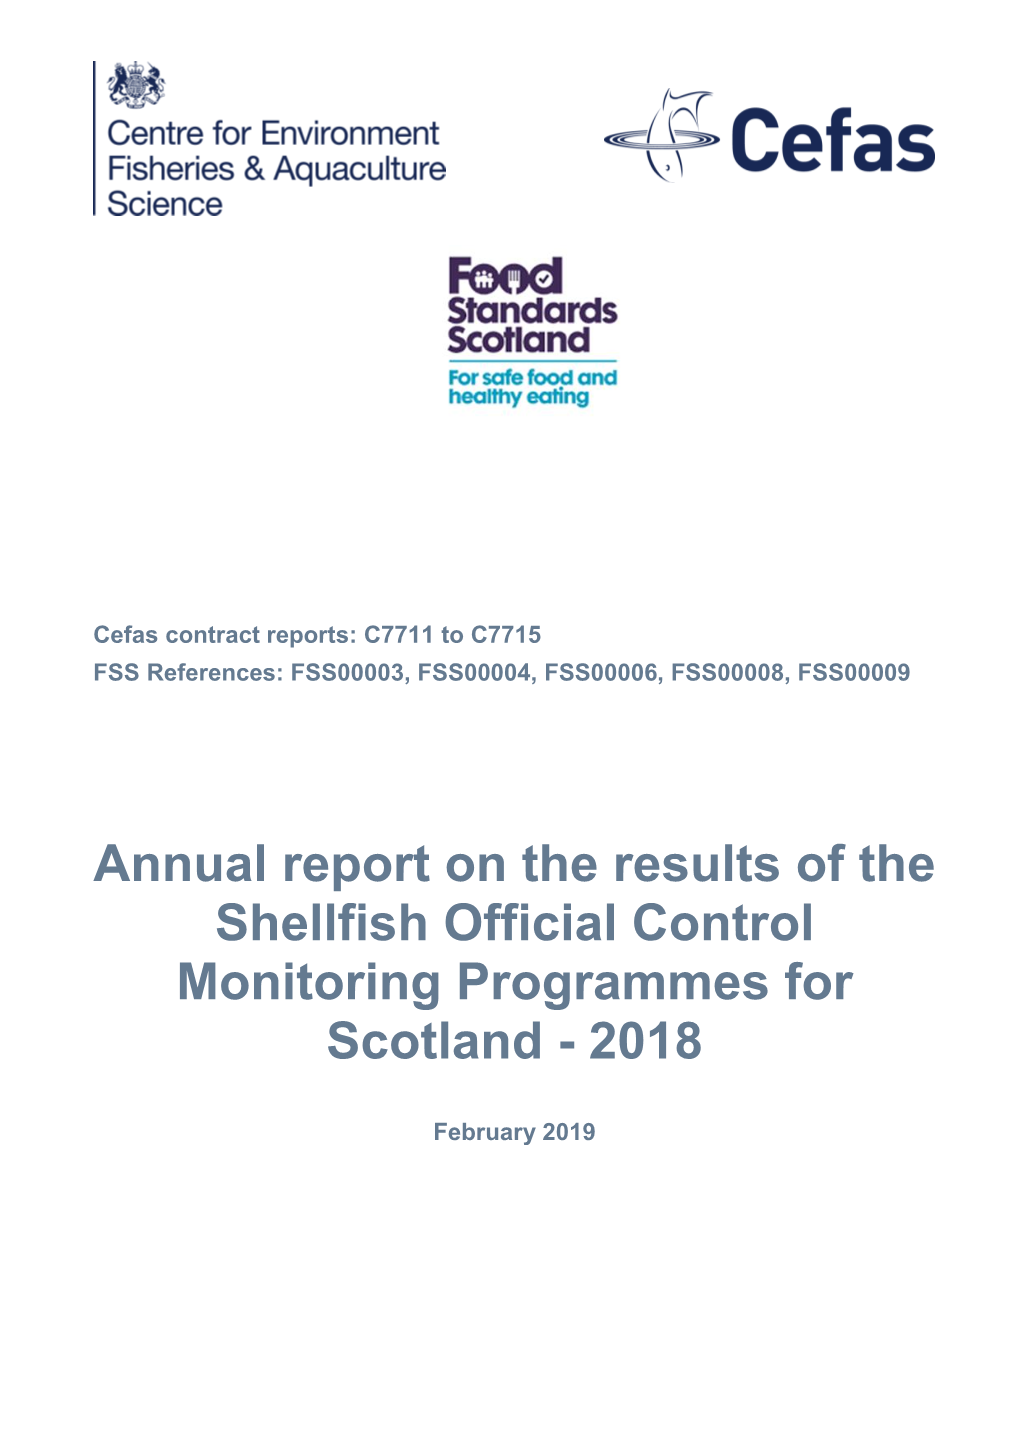 Annual Report on the Results of the Shellfish Official Control Monitoring Programmes for Scotland - 2018